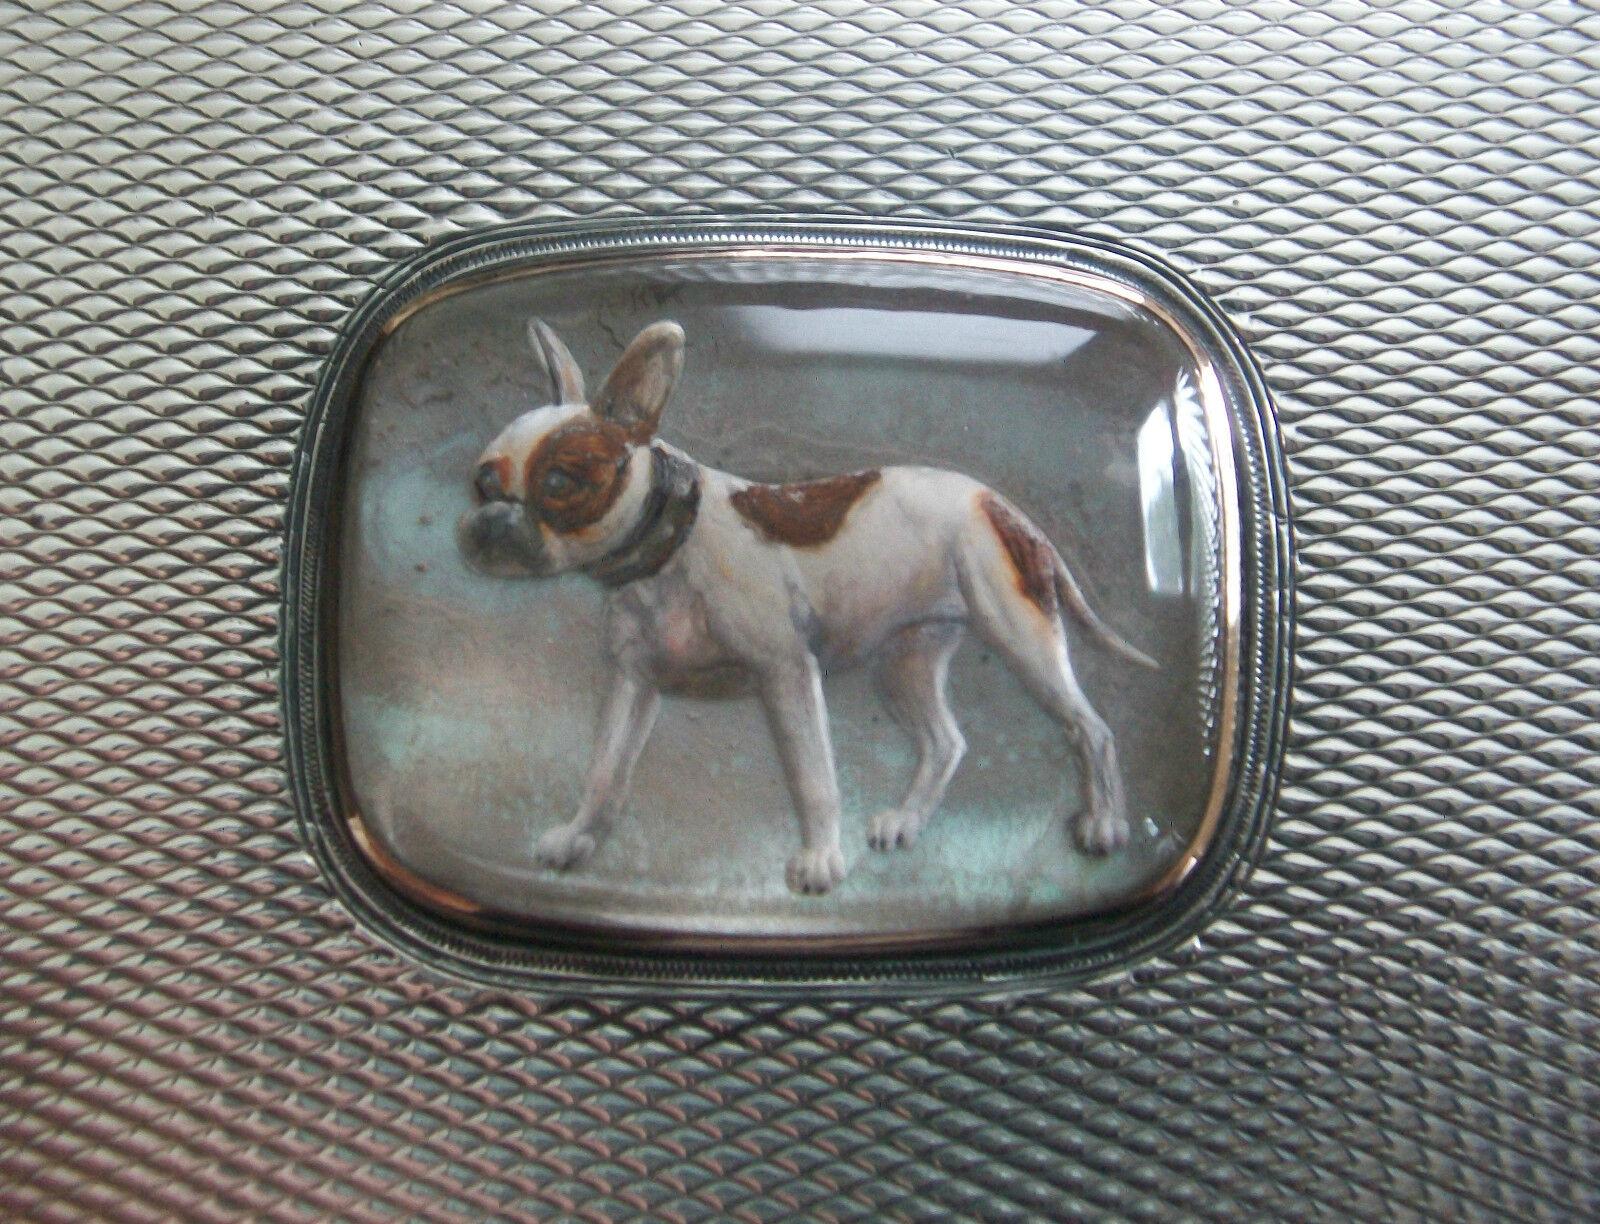 CARL HEISS - Antique - finest quality - silver and rose gold hinged snuff box with delicate diamond tooled surface - reverse painted French Bulldog on Rock Crystal Intaglio (often called 'Essex Crystal') - bezel set in rose gold and backed with